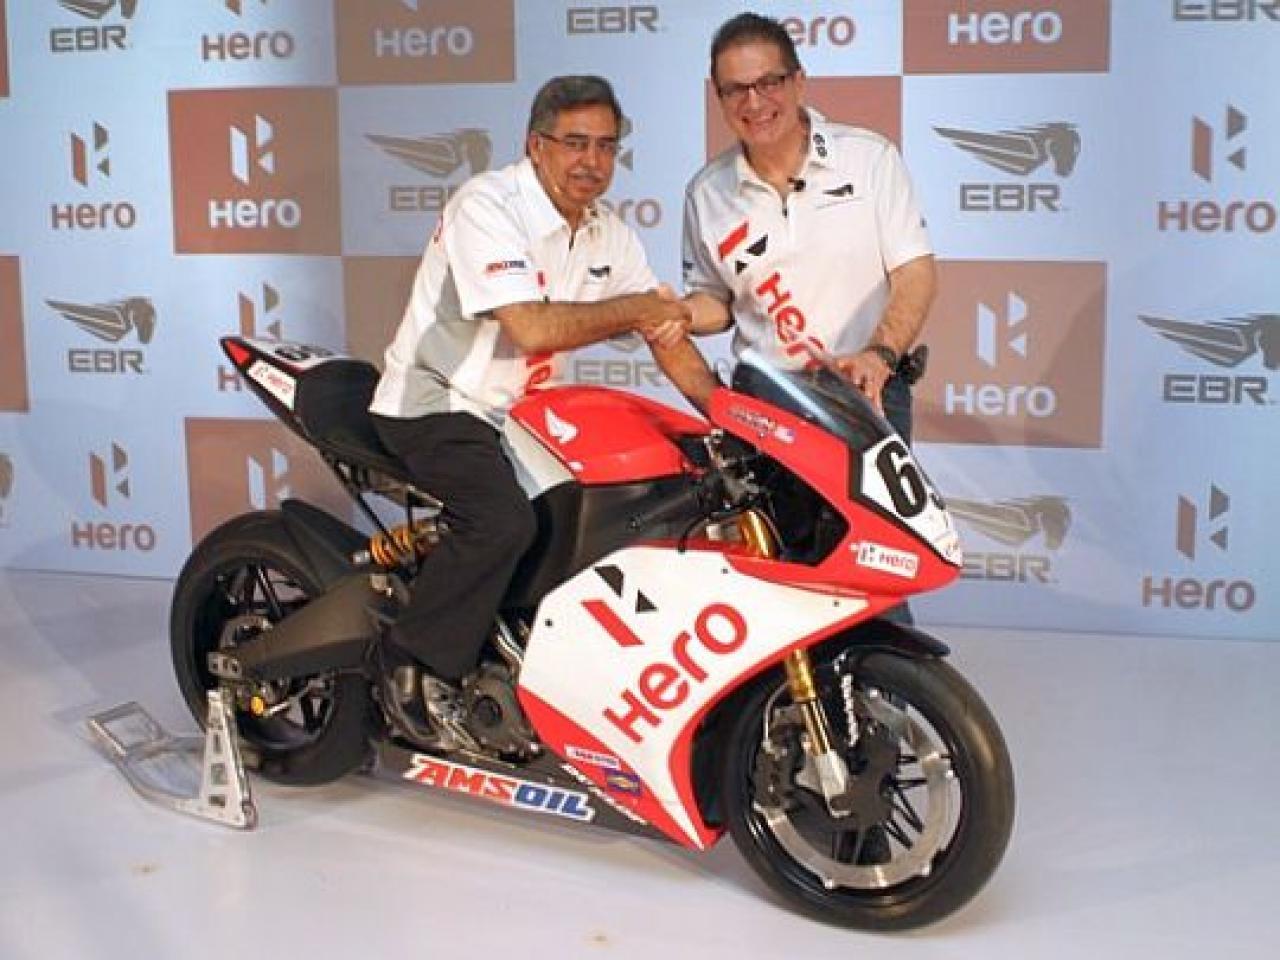 Hero MotoCorp shuts down US company after failing to launch bikes